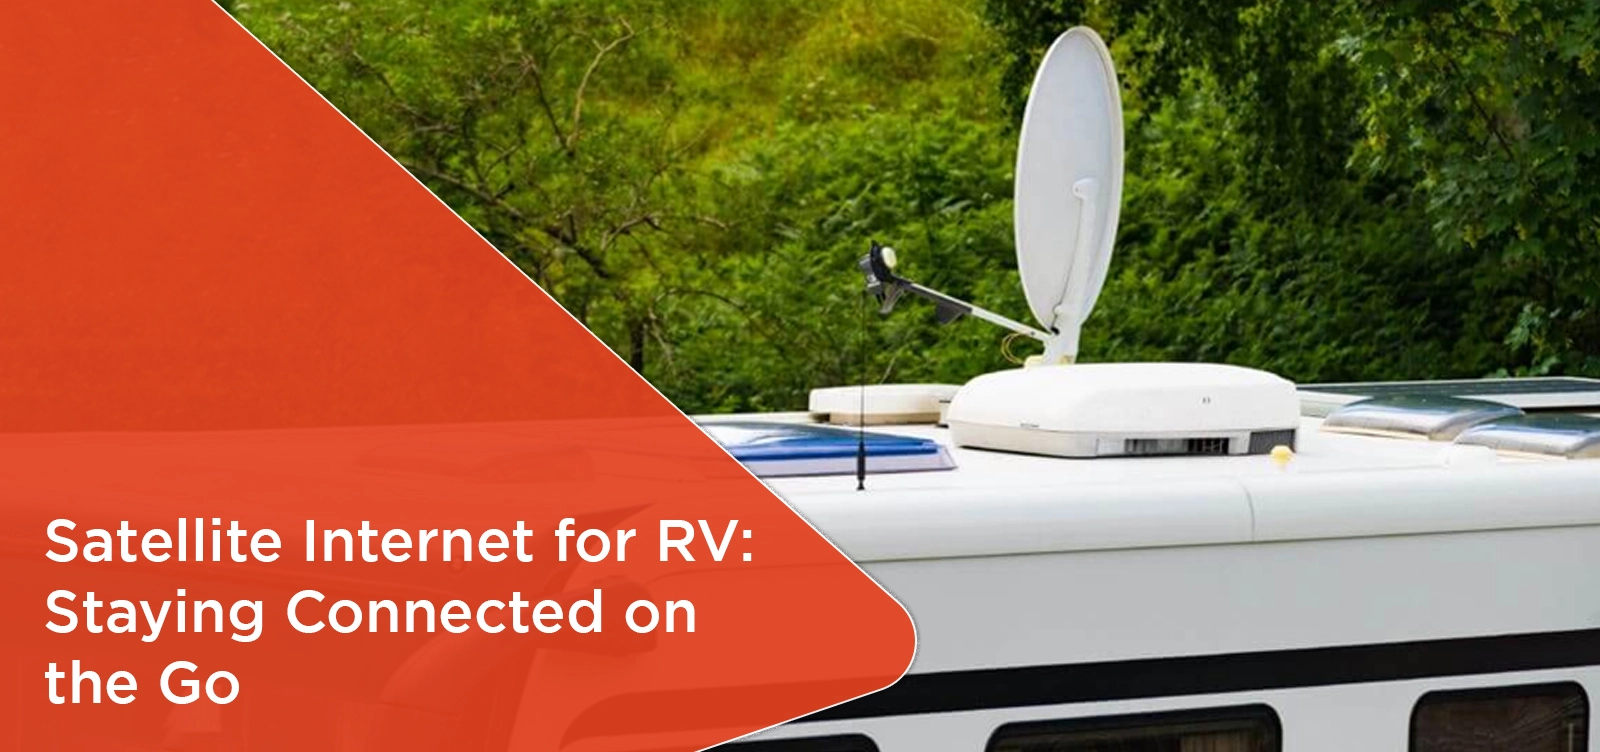 Satellite Internet for RV: Staying Connected on the Go